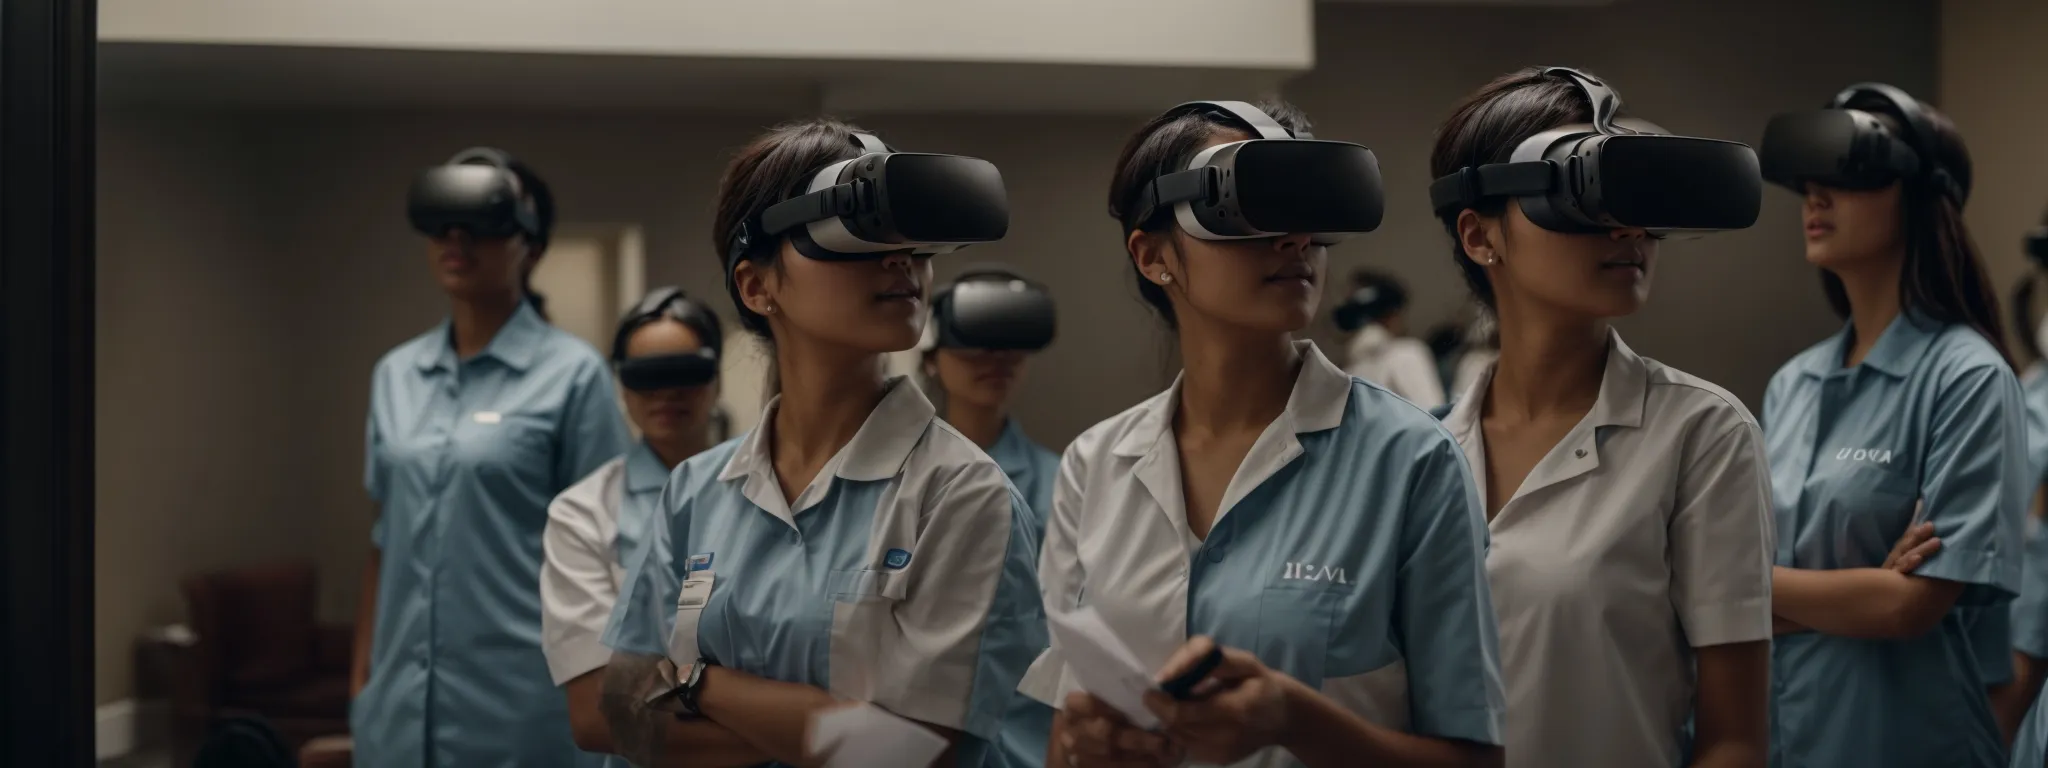 a group of hotel staff in uniforms are engaging with a vr training session, simulating customer interactions without any visible logos or text.